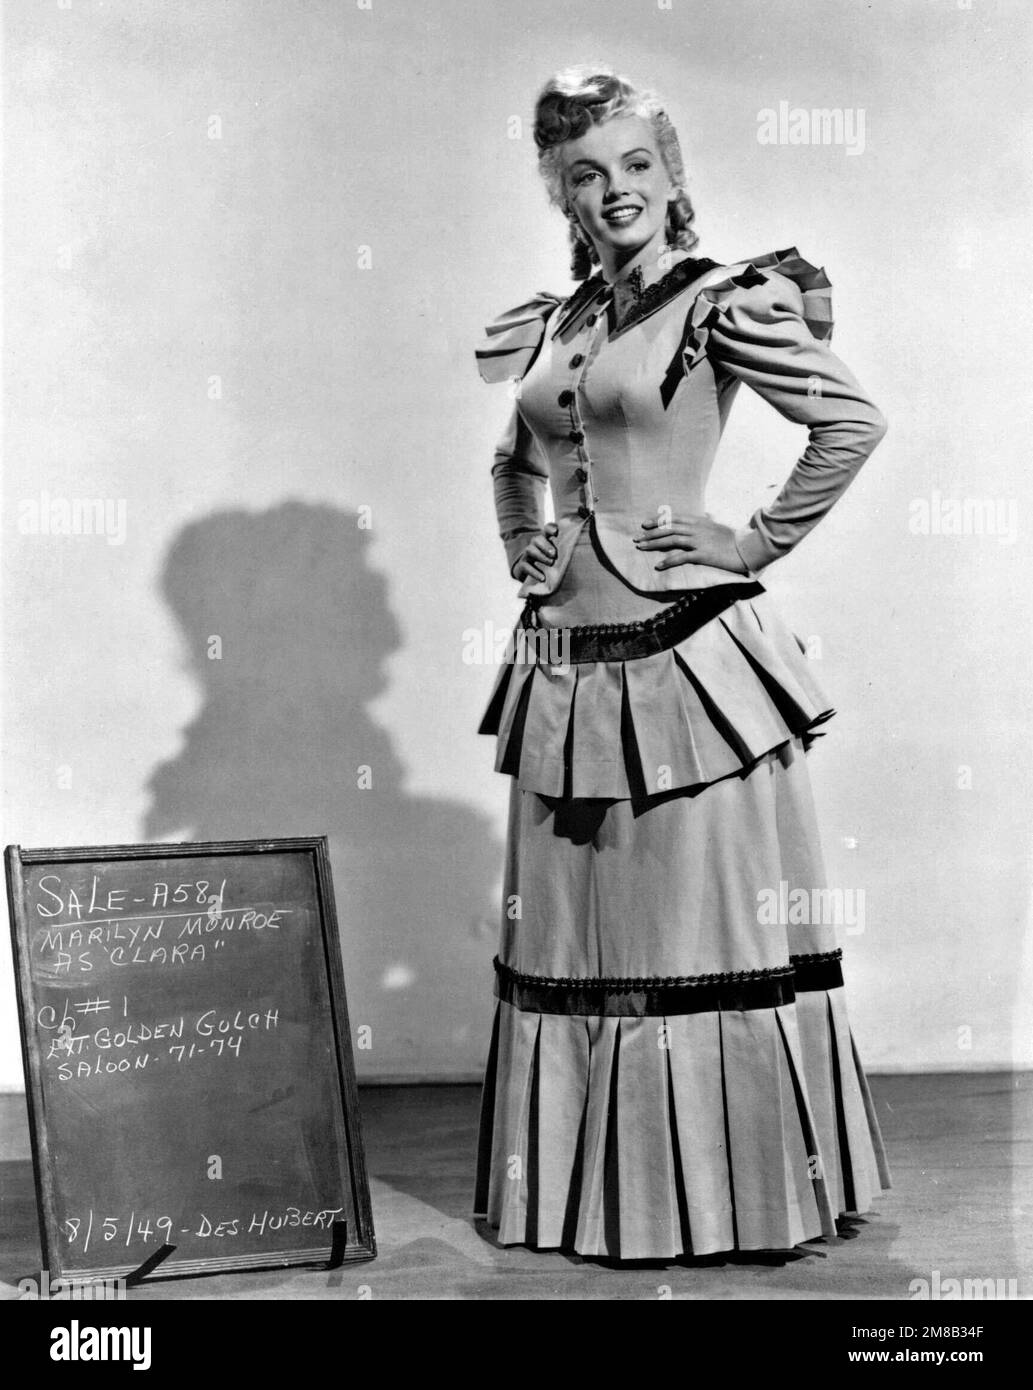 MARILYN MONROE in A TICKET TO TOMAHAWK (1950), directed by RICHARD SALE. Credit: 20TH CENTURY FOX / Album Stock Photo